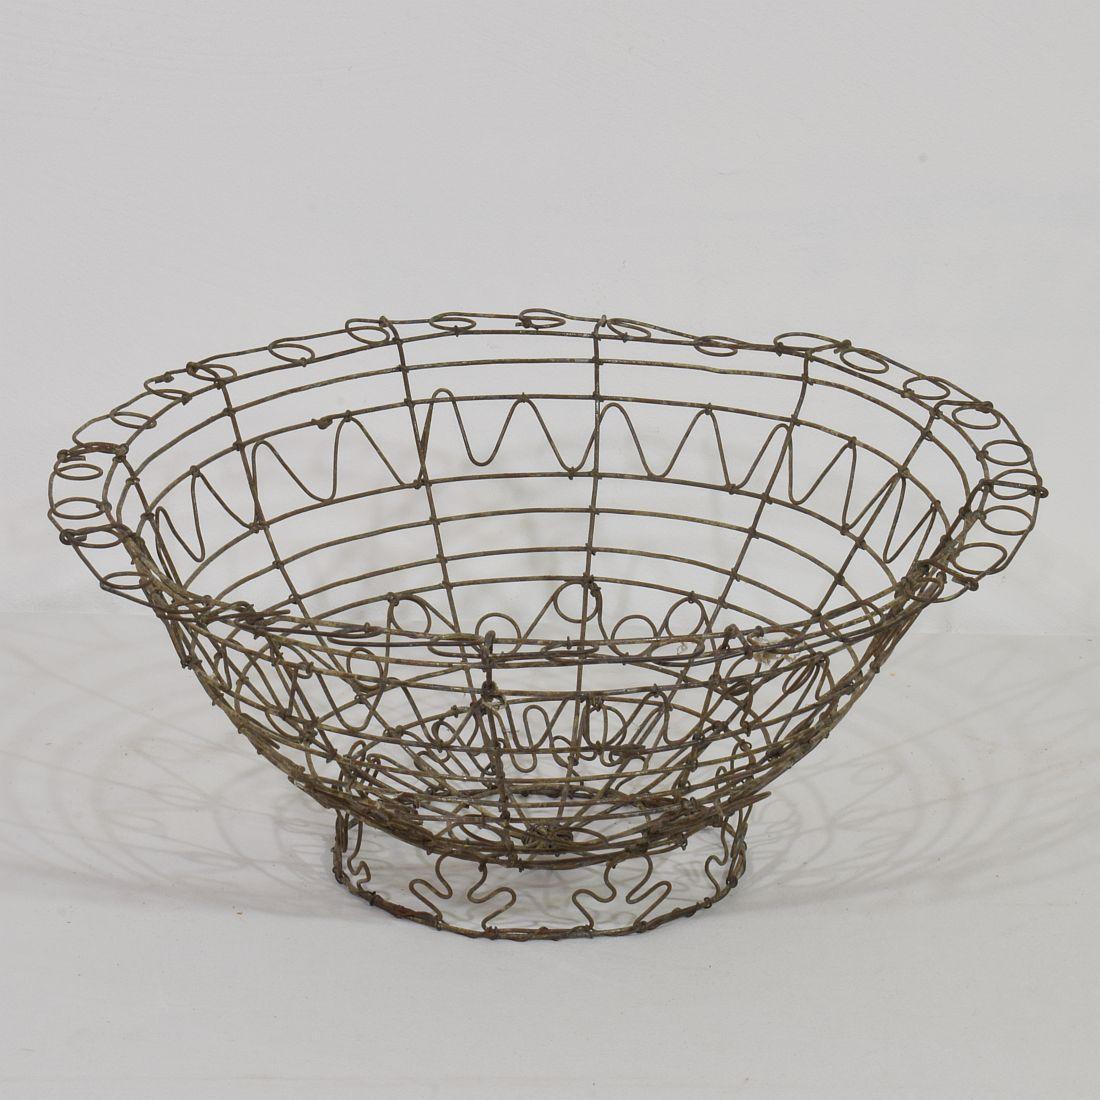 Lovely handmade iron wirework basket . Very nicely made and a great statement on your countertop or table.
France, circa 1850-1900.
Weathered.